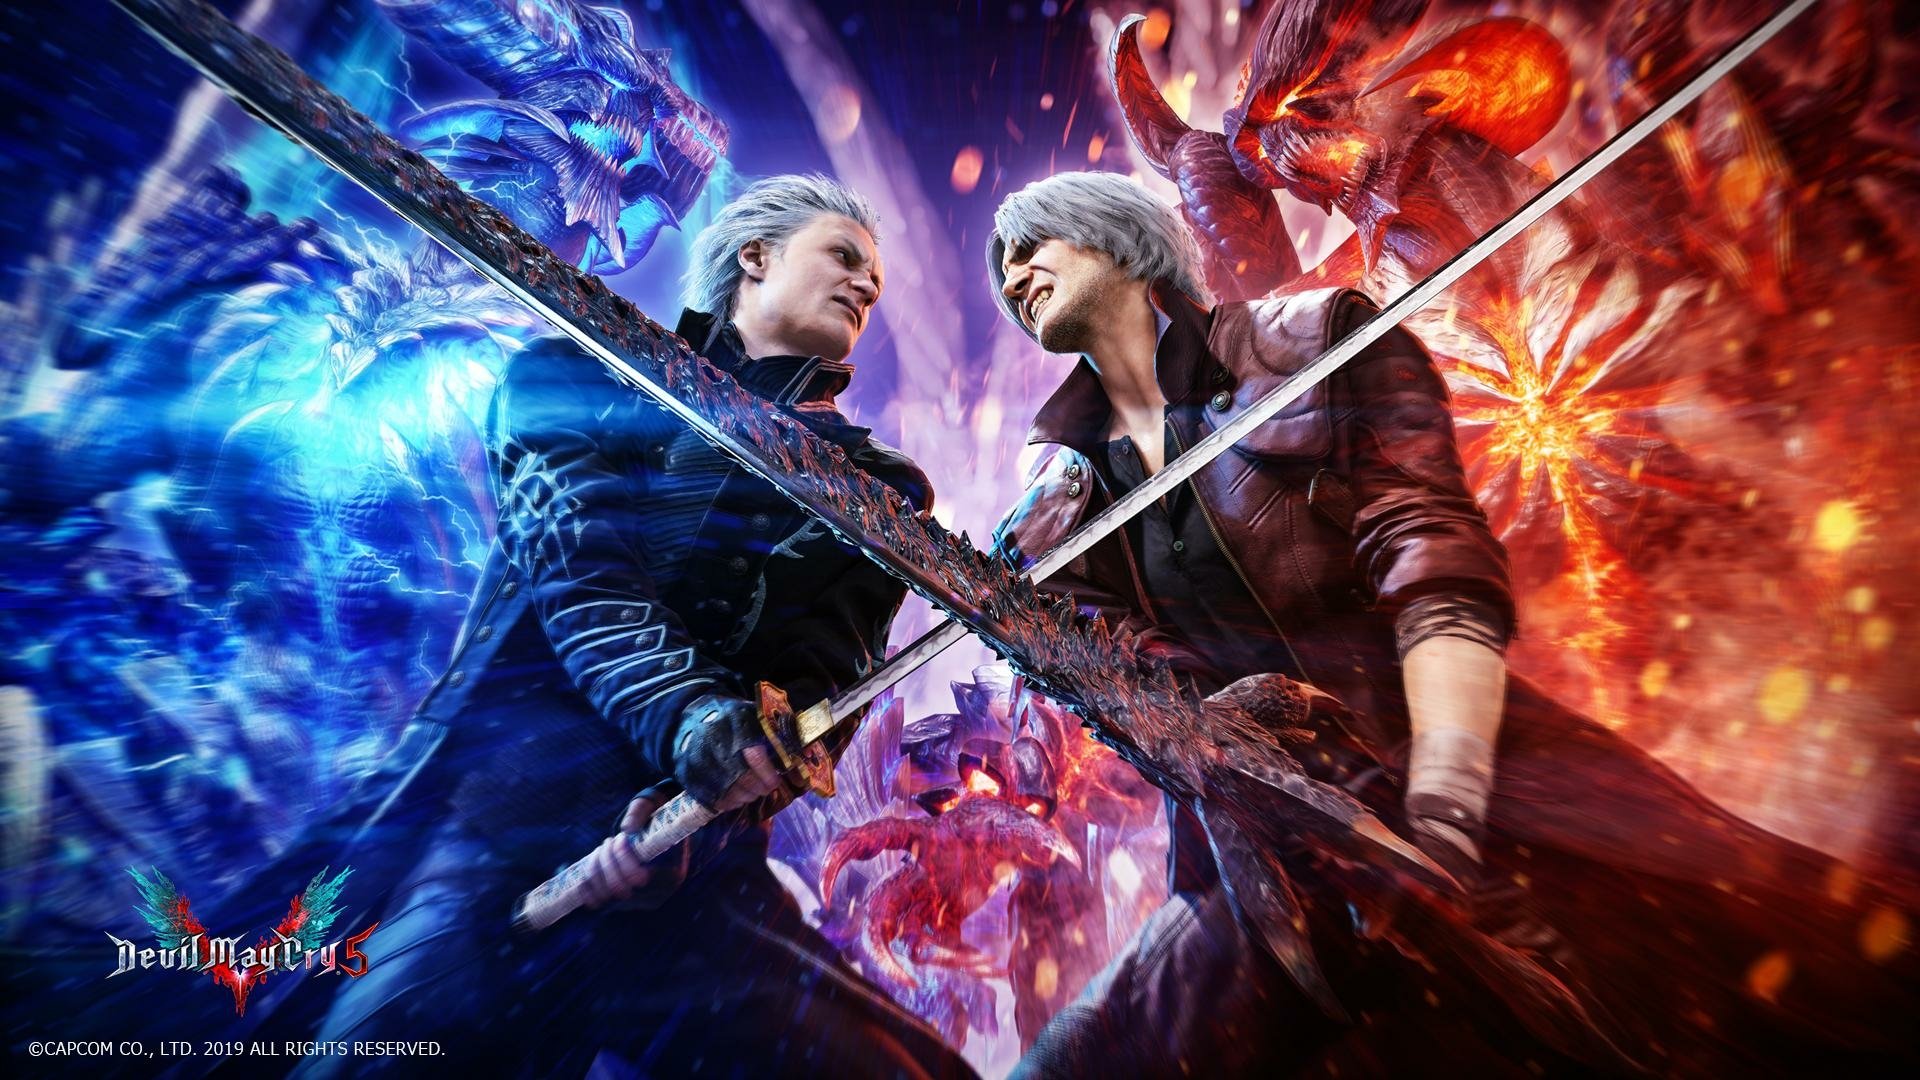 devil may cry hd collection update notes